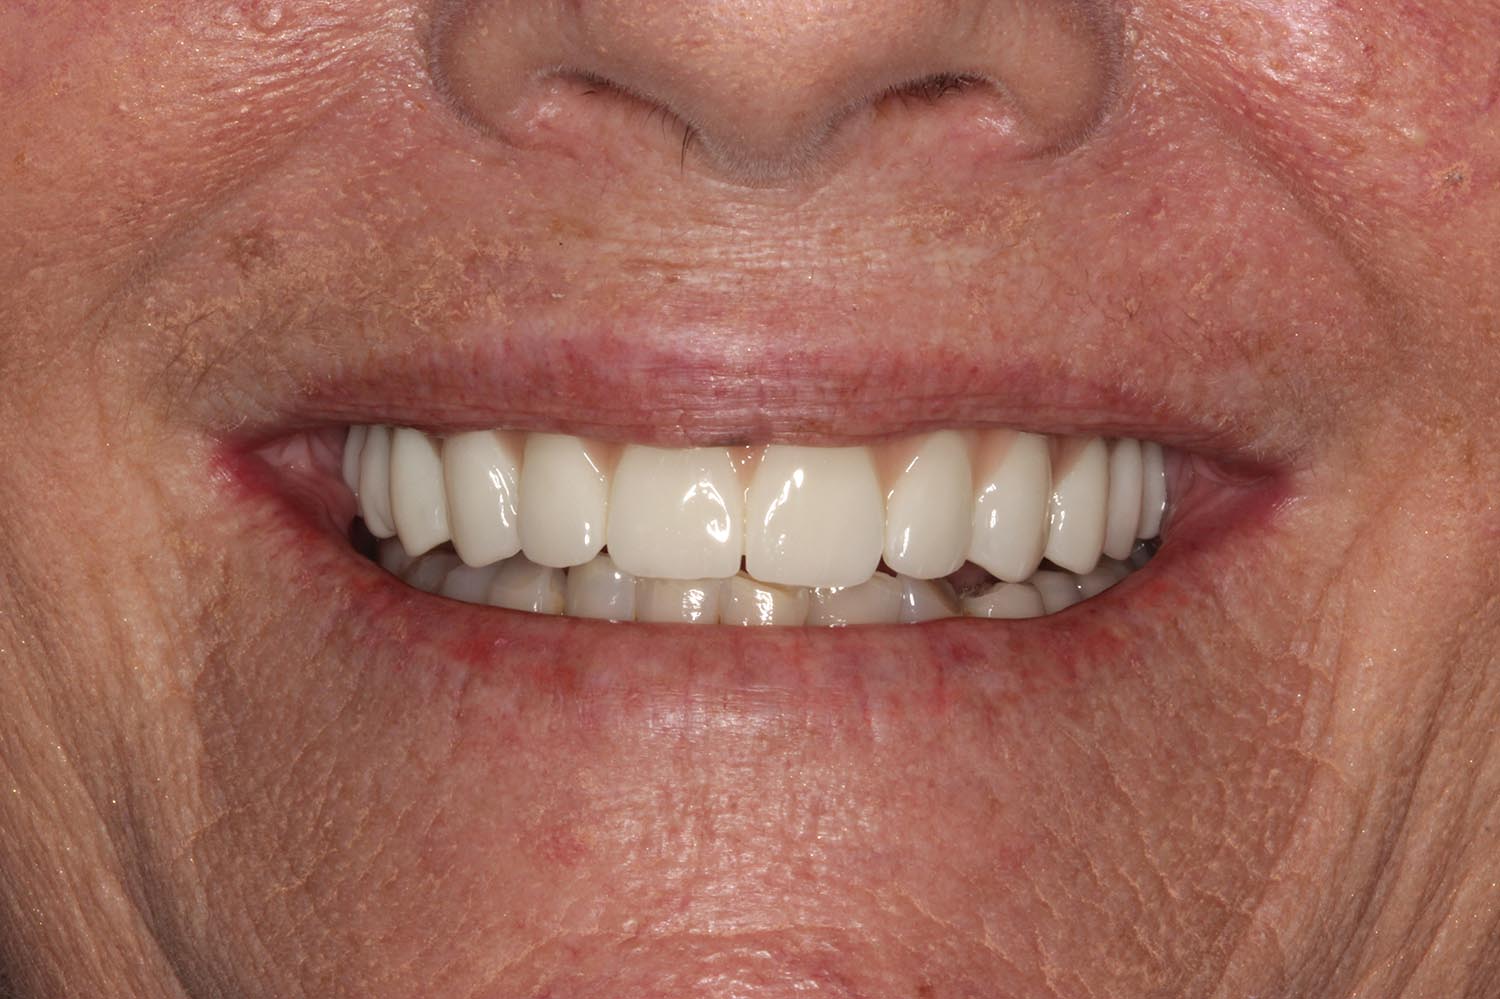 After adding limited implants and restorations